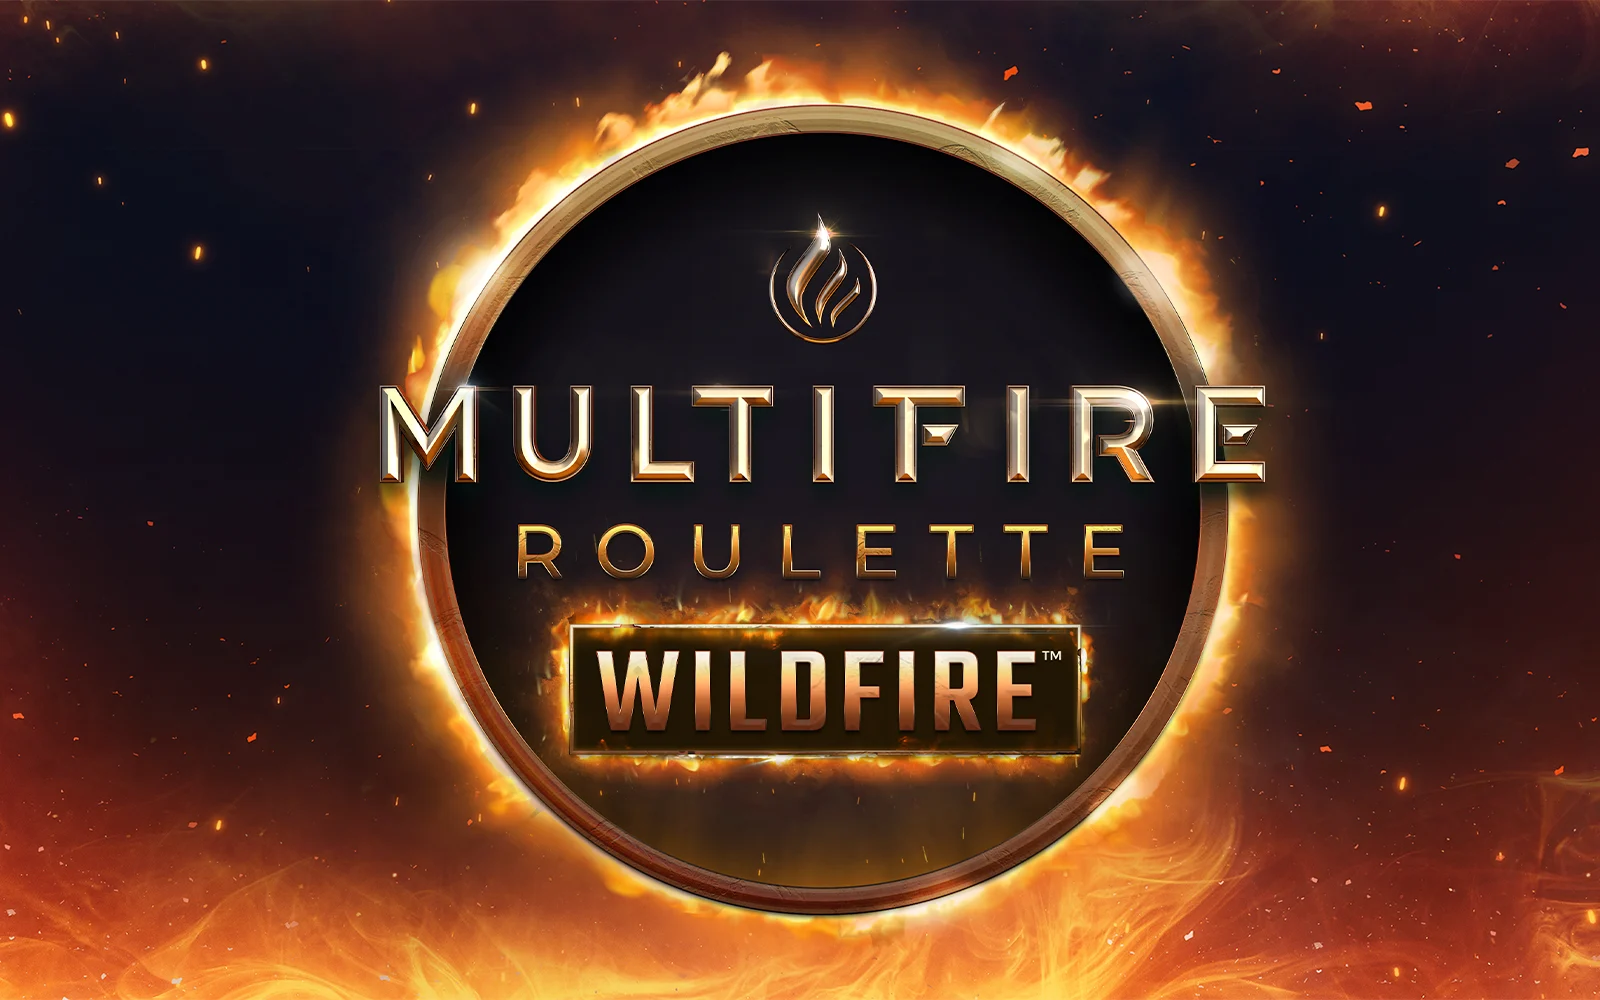 Play Multifire Roulette Wildfire™ on Starcasino.be online casino